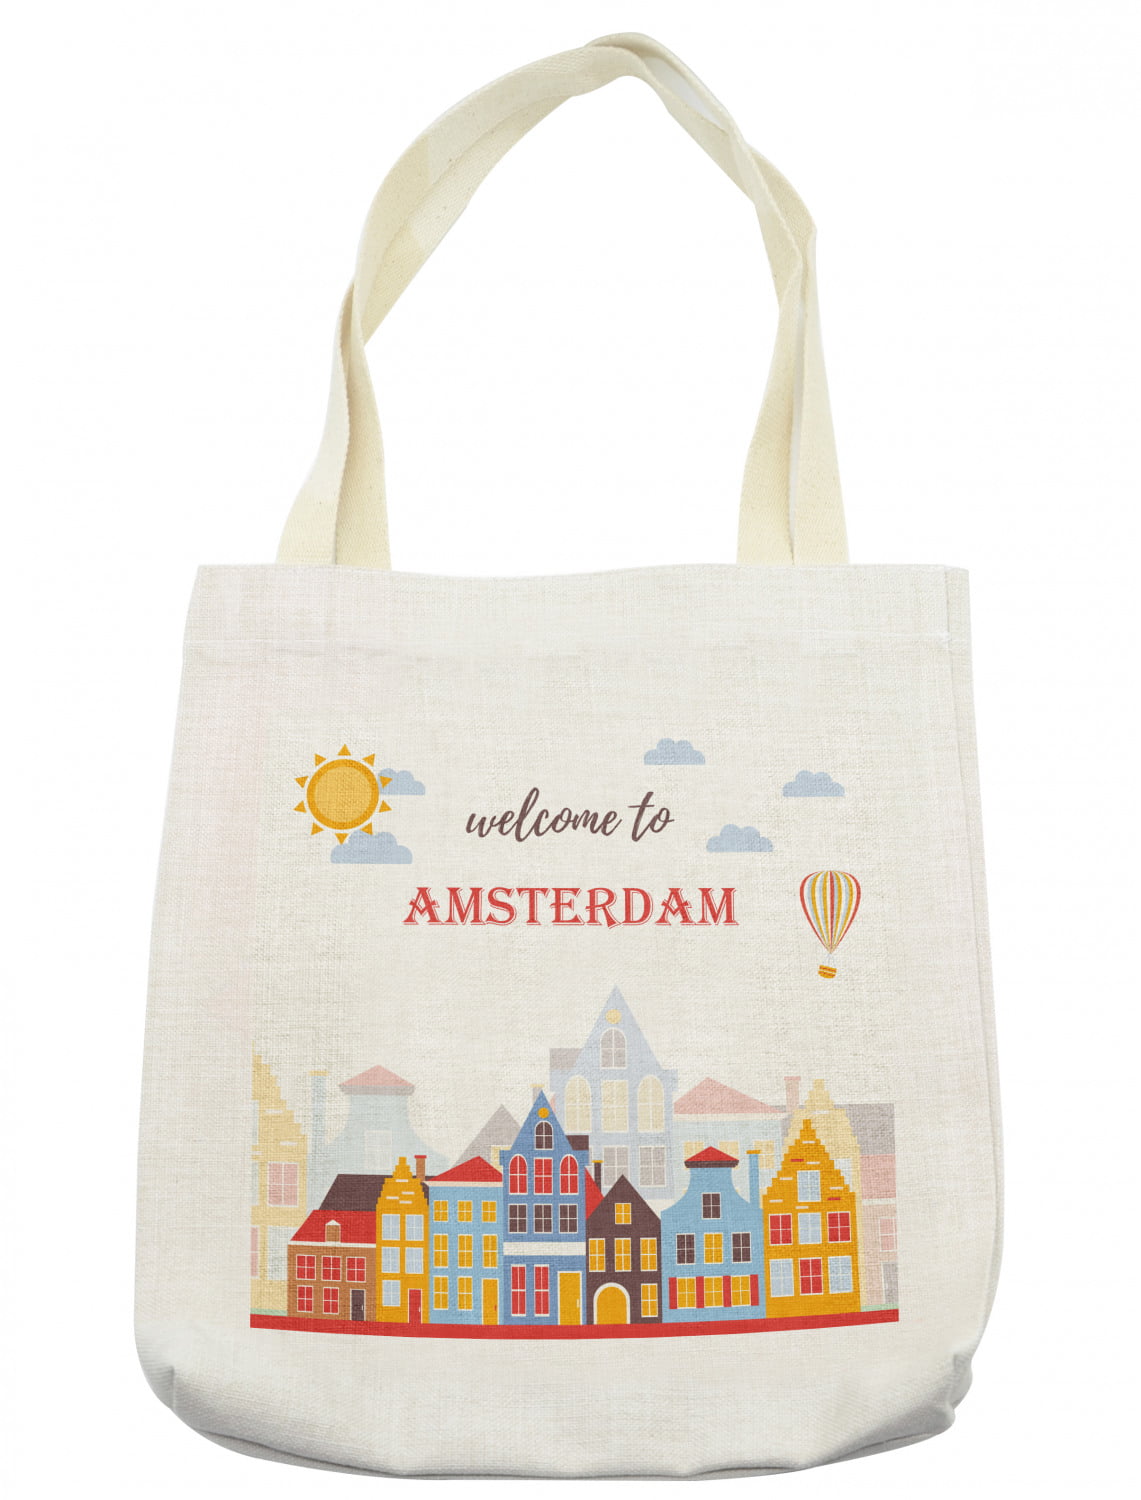 Amsterdam Tote Bag, Sunny Illustration of Poster Design City Scene Print, Cloth Linen Reusable Bag for Shopping Books Beach and More, 16.5" X 14", Cream, by Ambesonne - Walmart.com